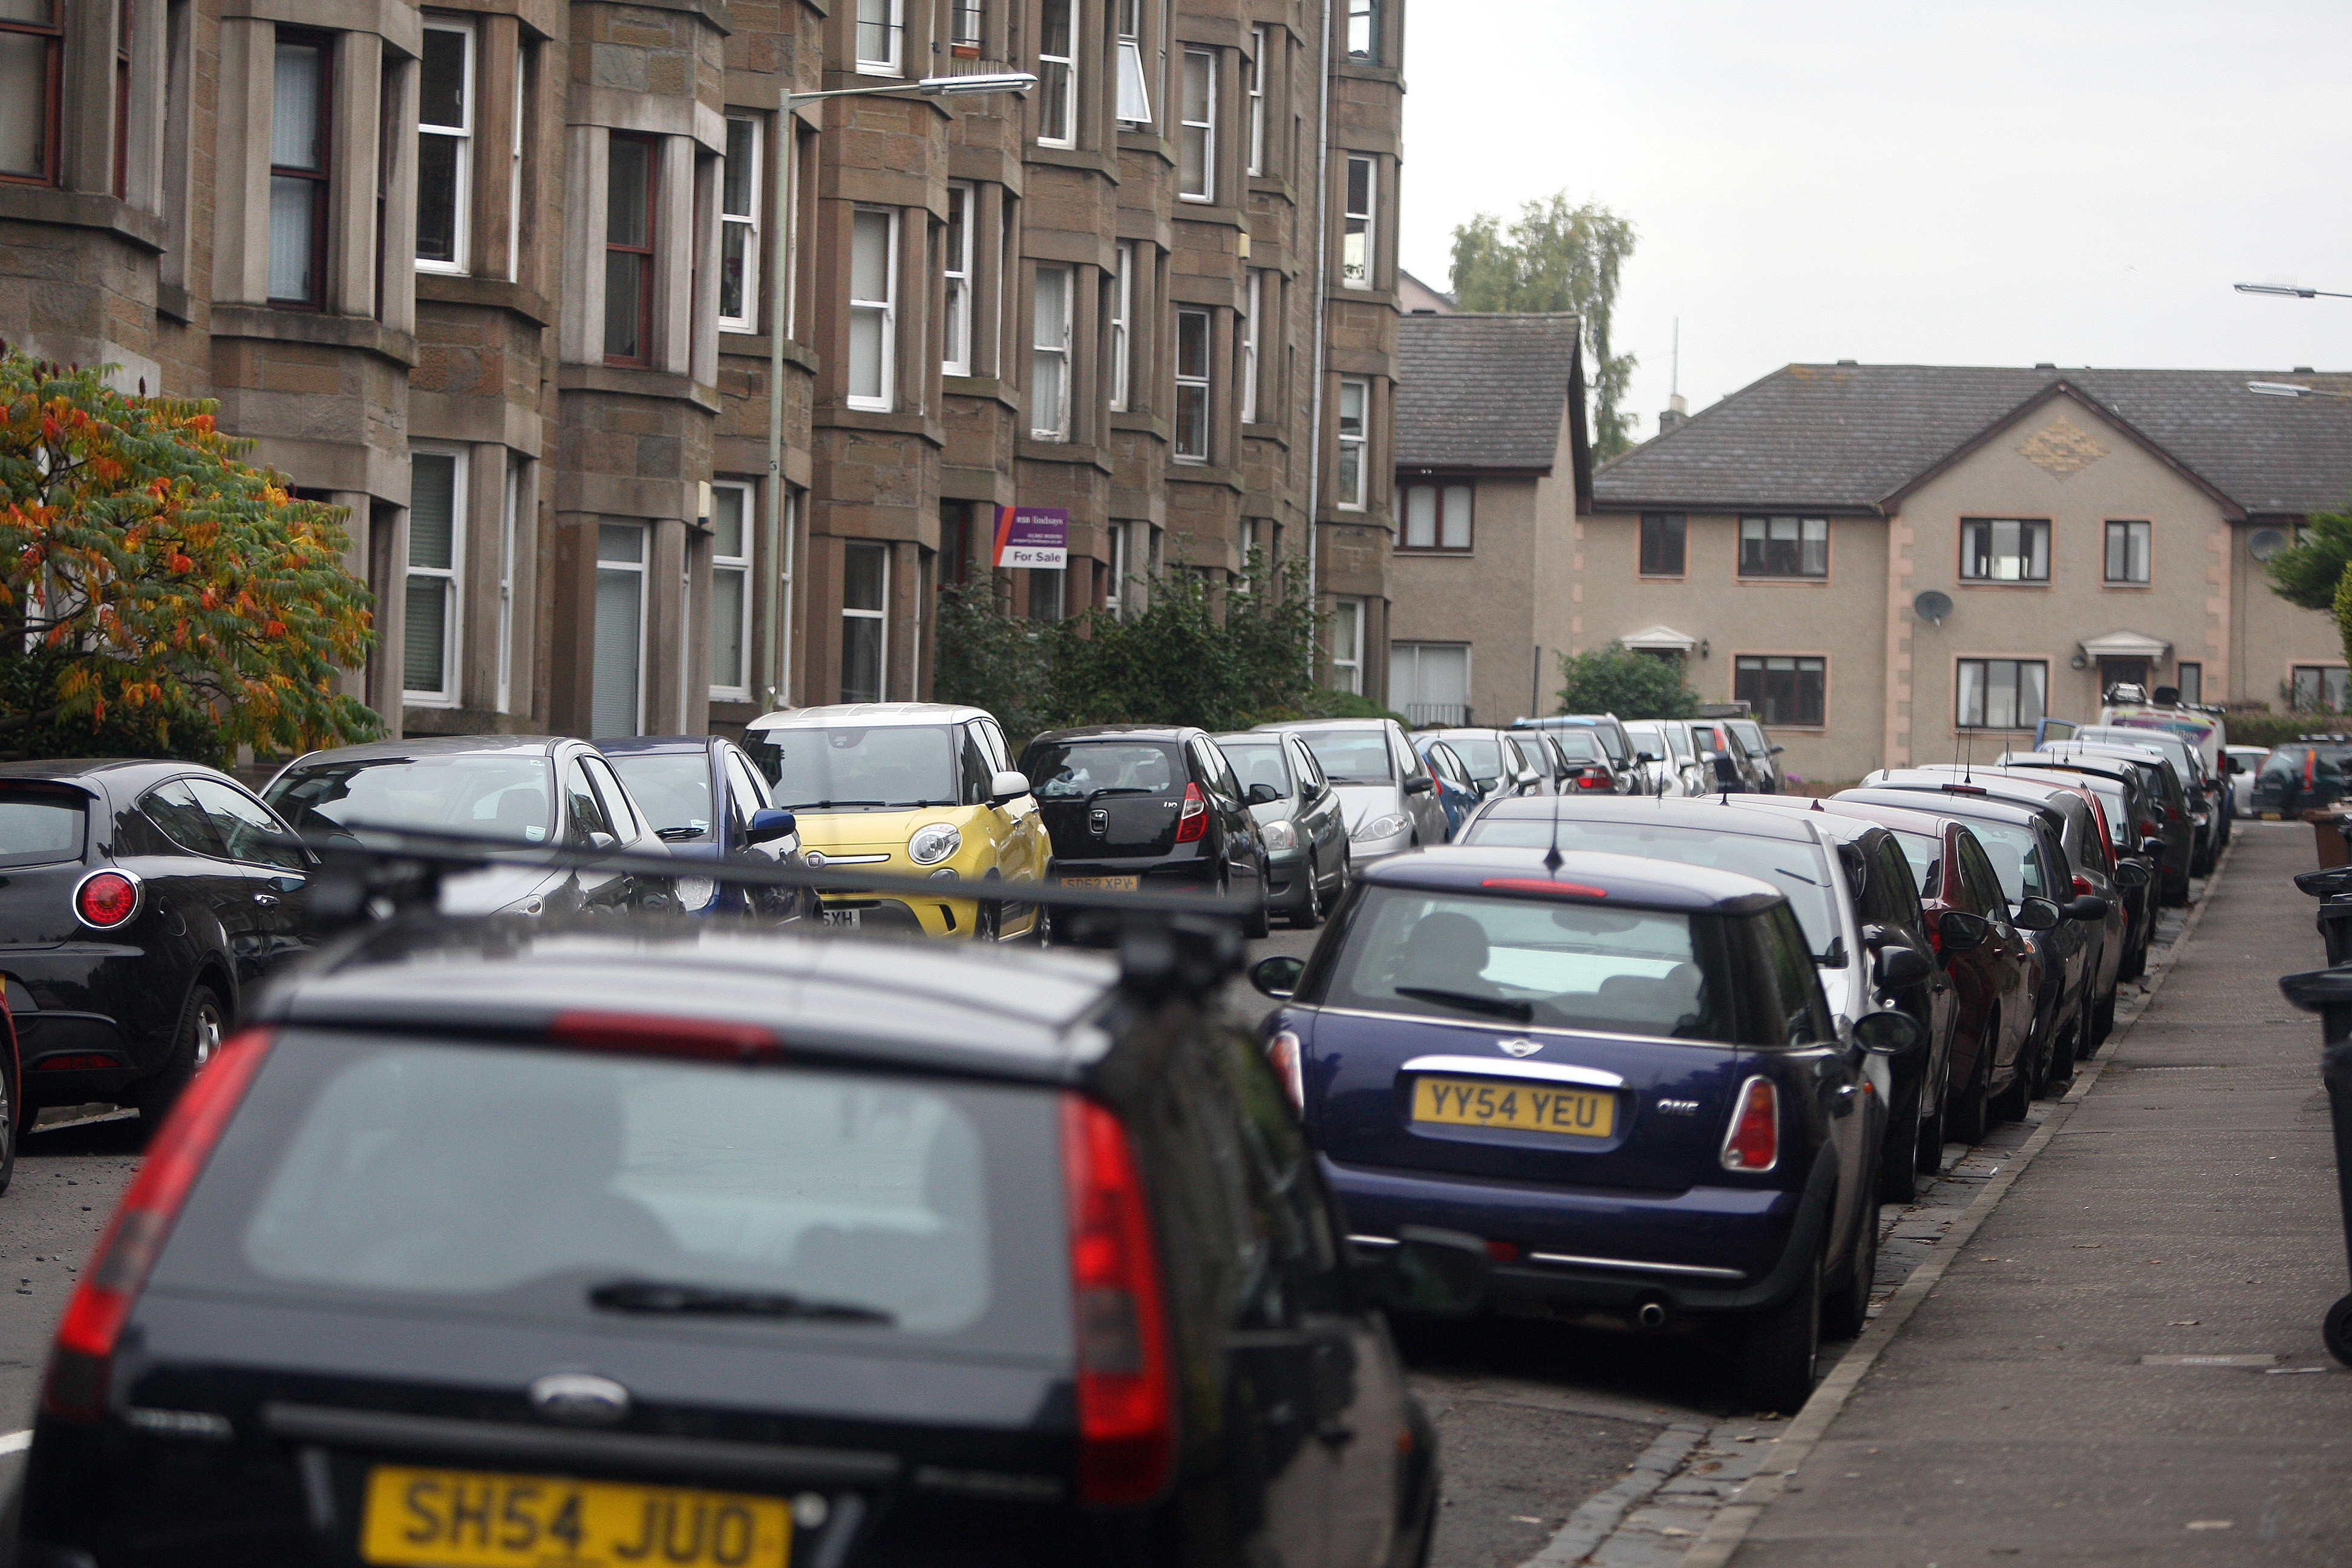 It is feared that new charges in the West End's car parks would lead to more on-street parking, which is already a problem in the area.